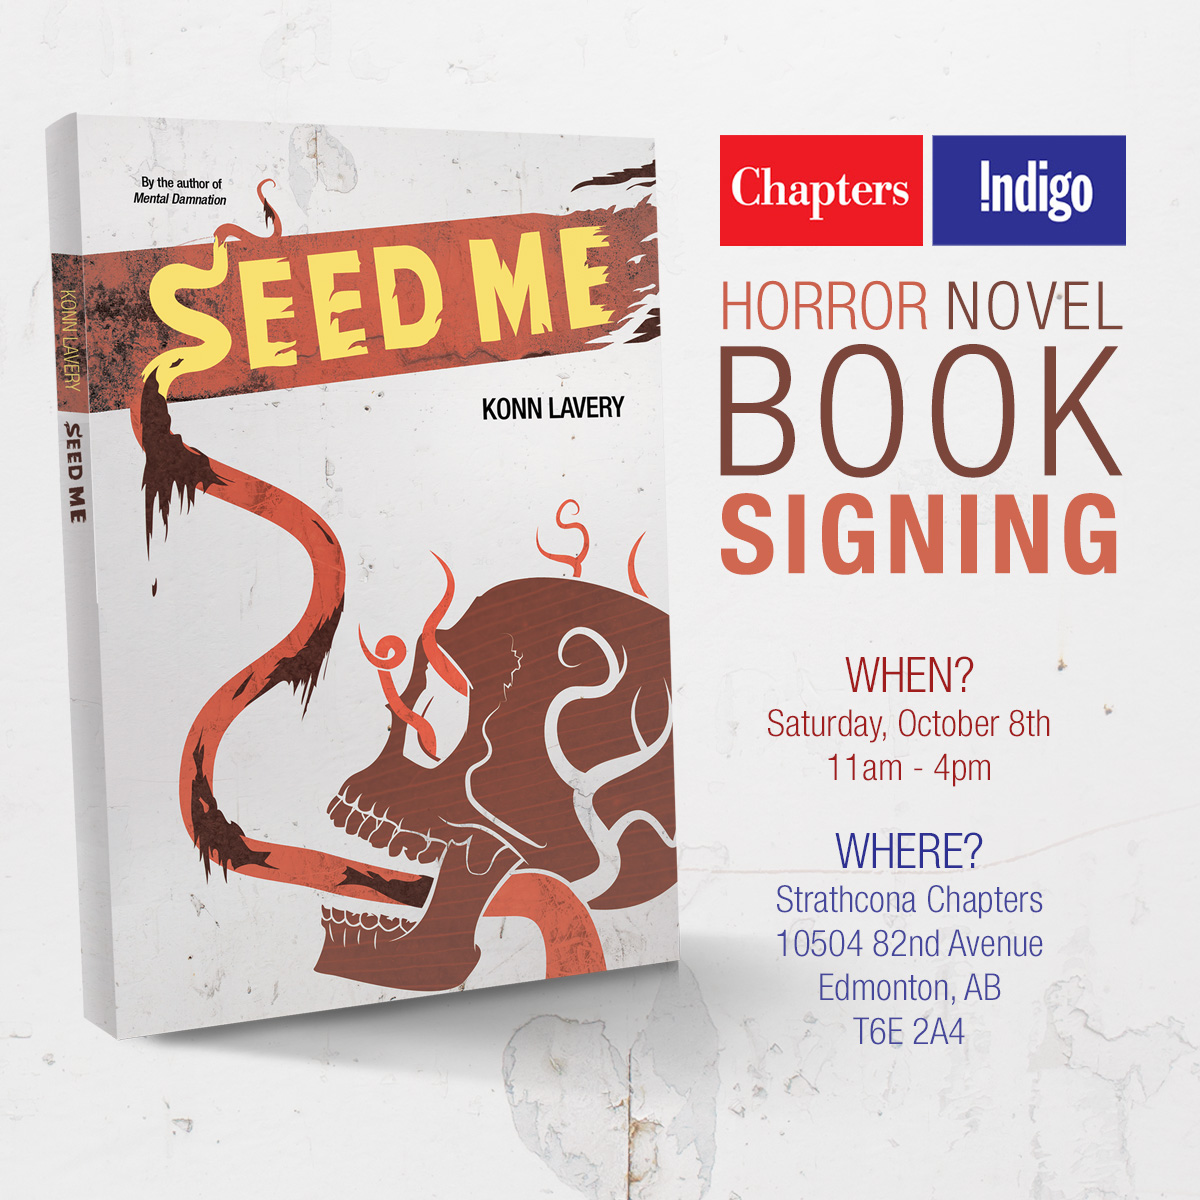 Seed Me Signing at Strathcona Chapters